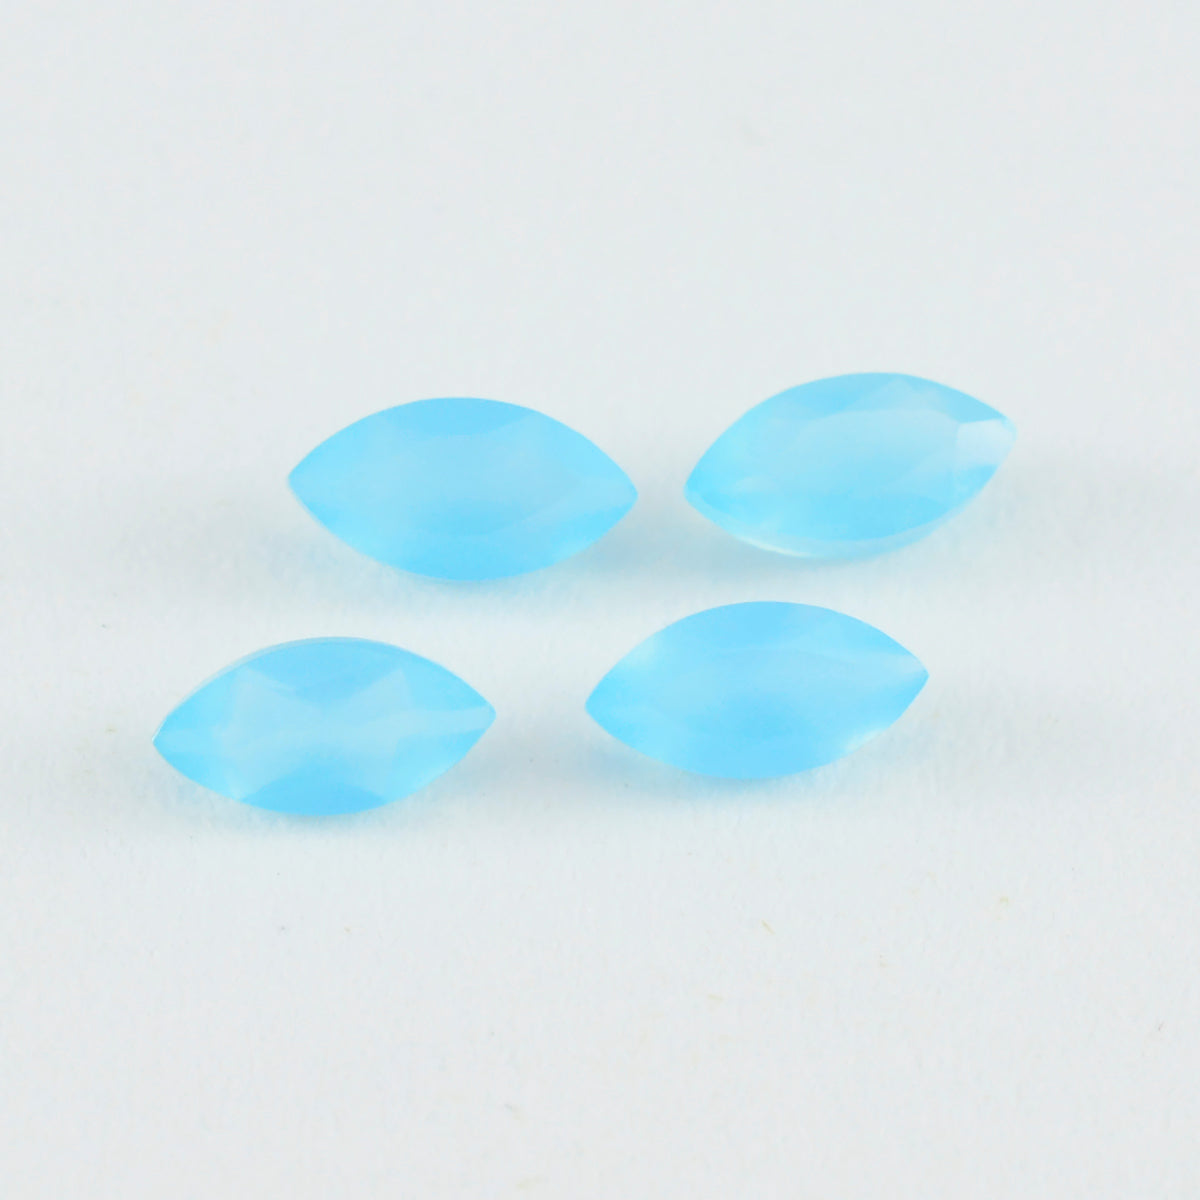 Riyogems 1PC Genuine Blue Chalcedony Faceted 6x12 mm Marquise Shape A+ Quality Loose Stone